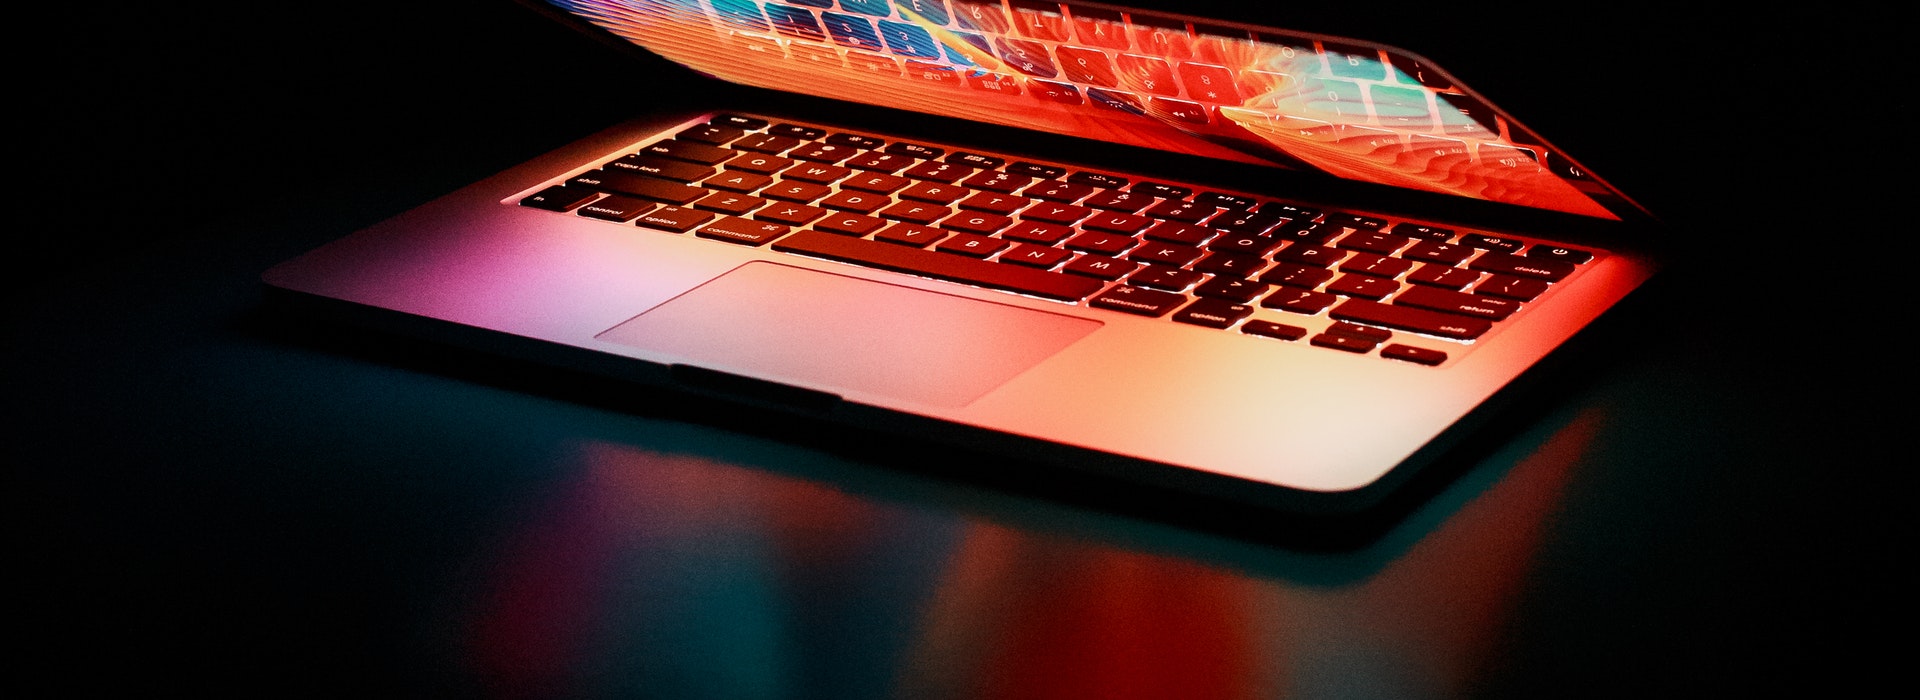 A multicolored laptop glows against a black backdrop